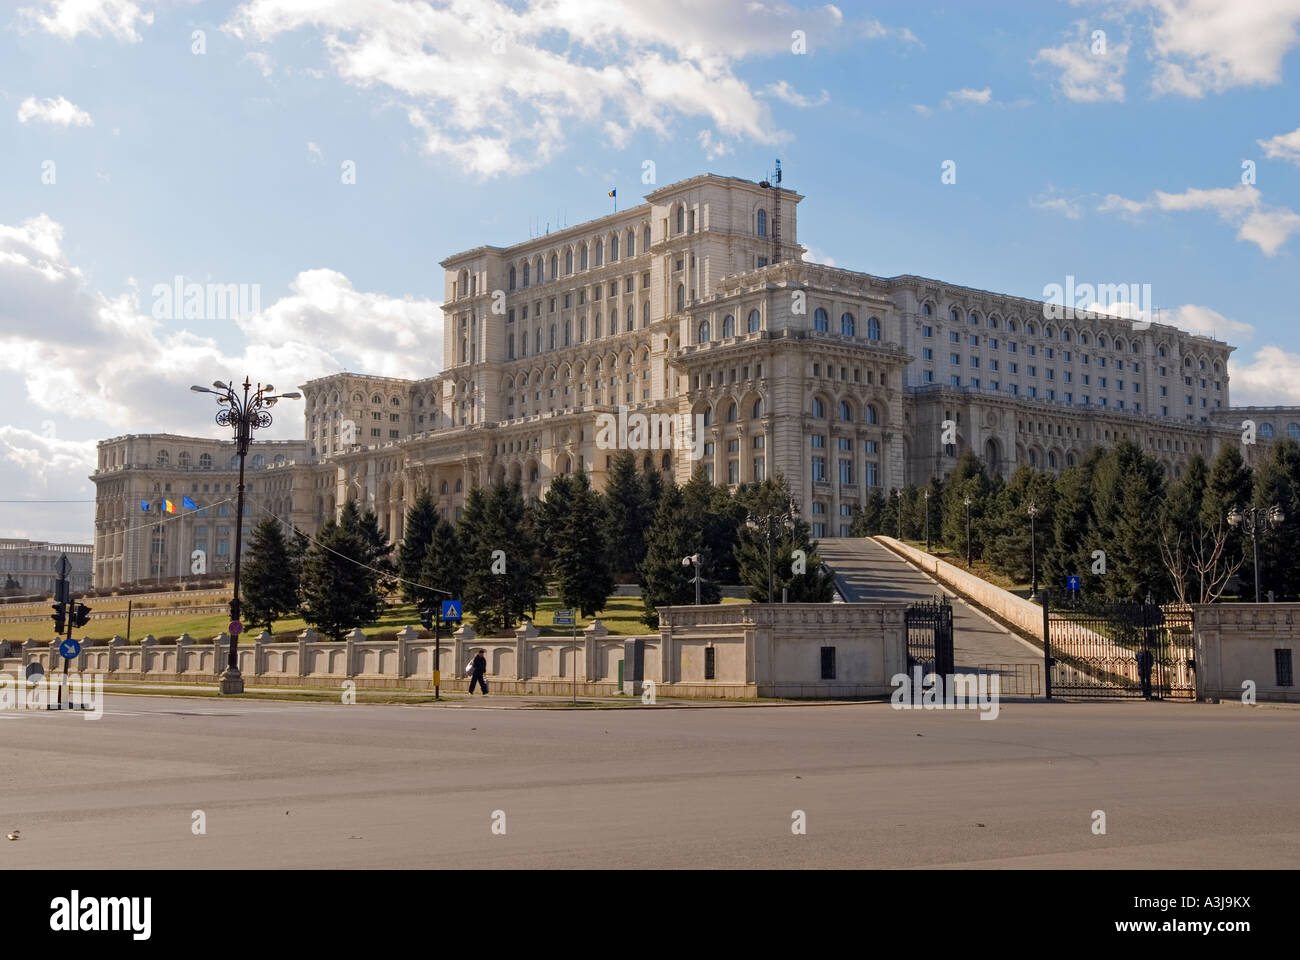 Exterior view of The Palace of the Parliament Palatul Parlamentului in Bucharest, Romania Stock Photo